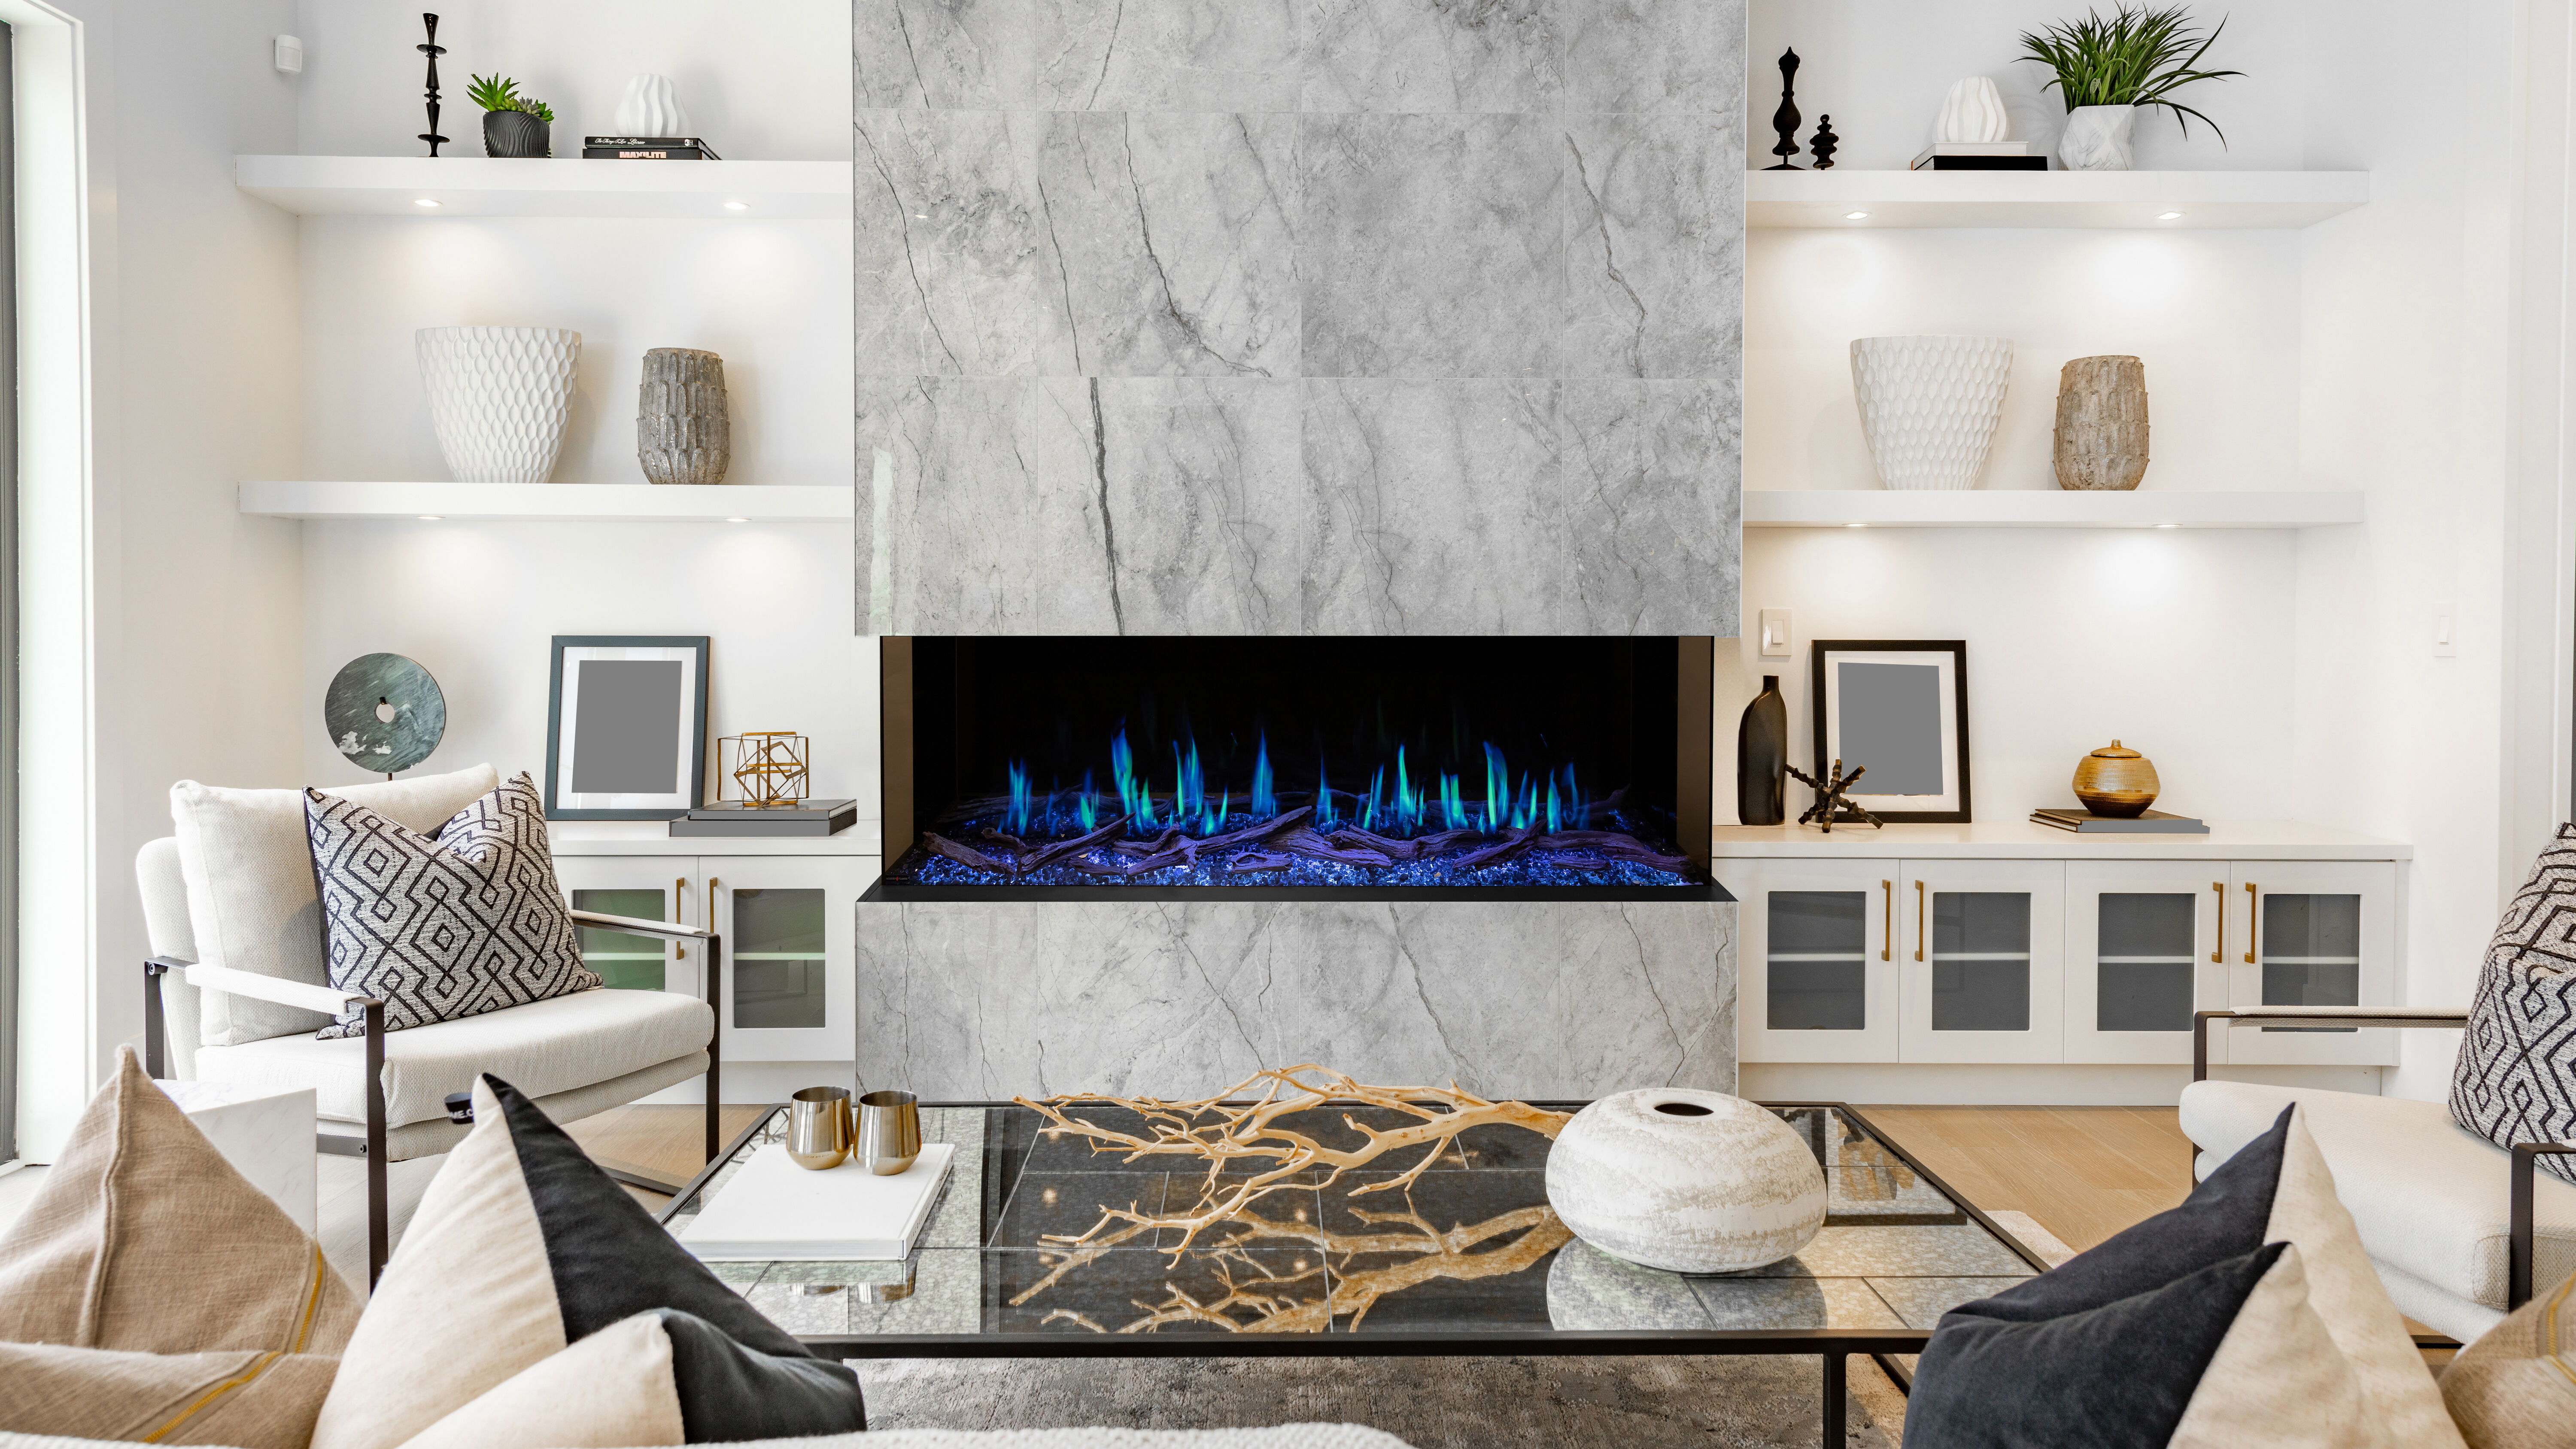 A modern living room with built-in shelving and a large electric fireplace that has blue flames and accent lighting.